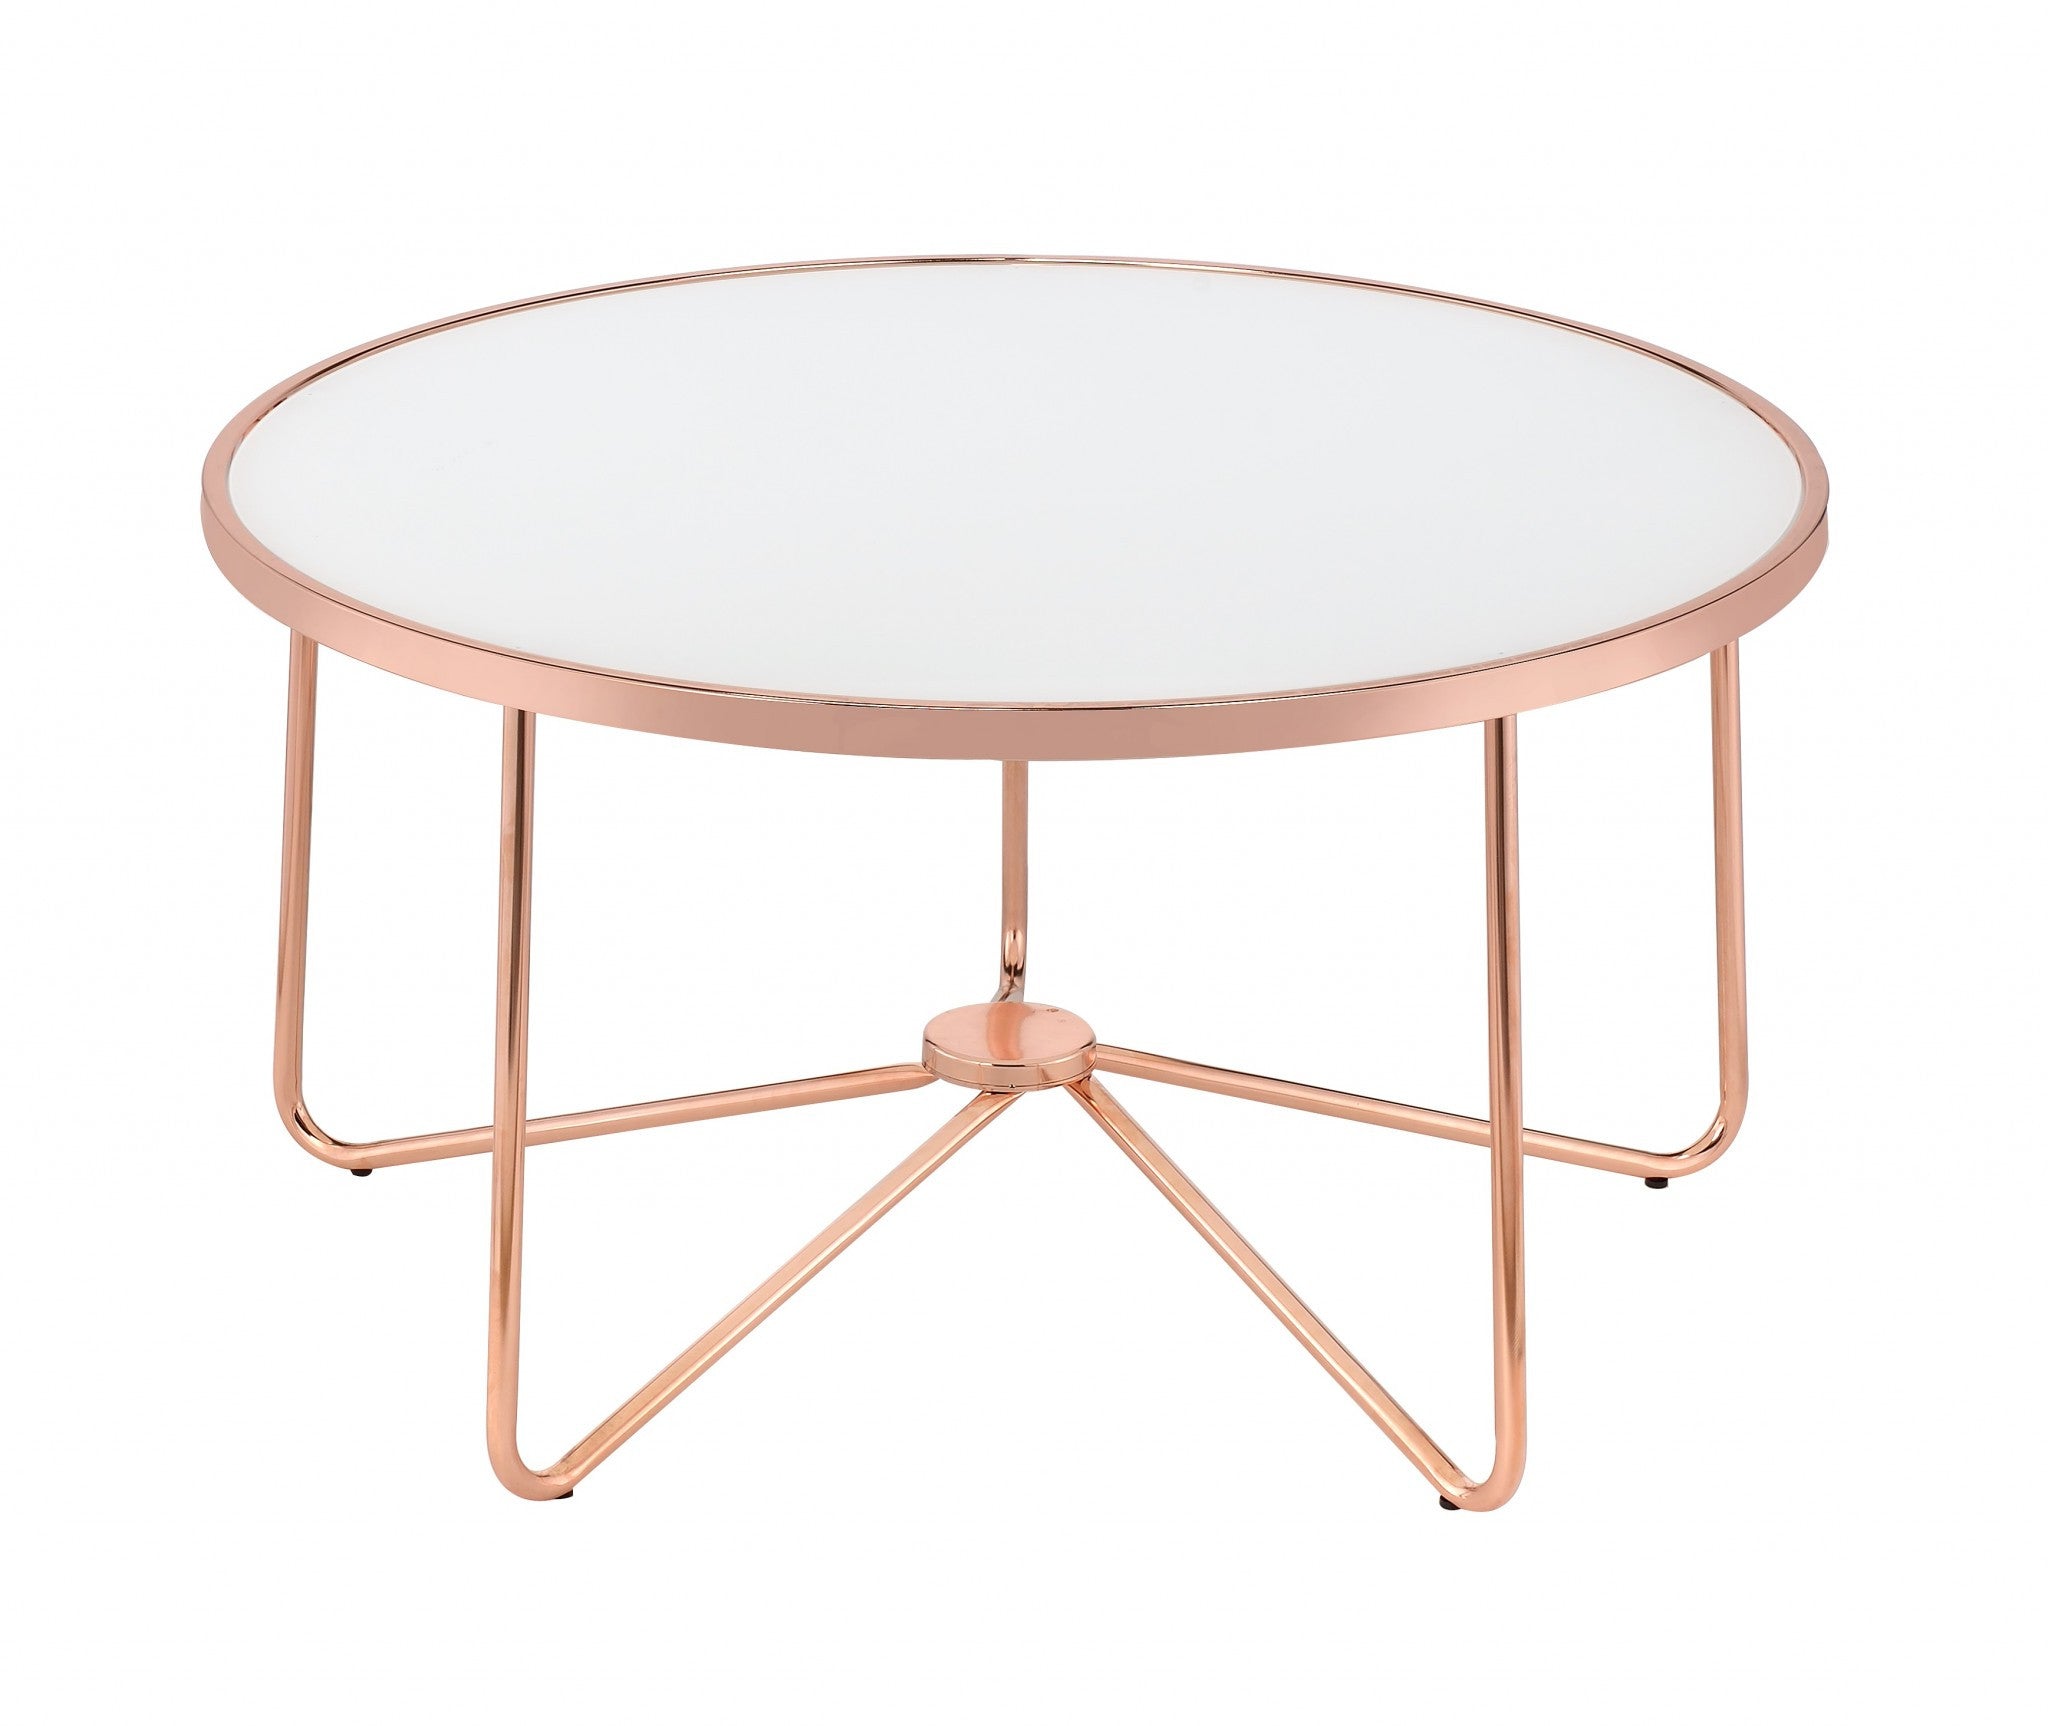 34" X 34" X 18" Frosted Glass And Rose Gold Coffee Table